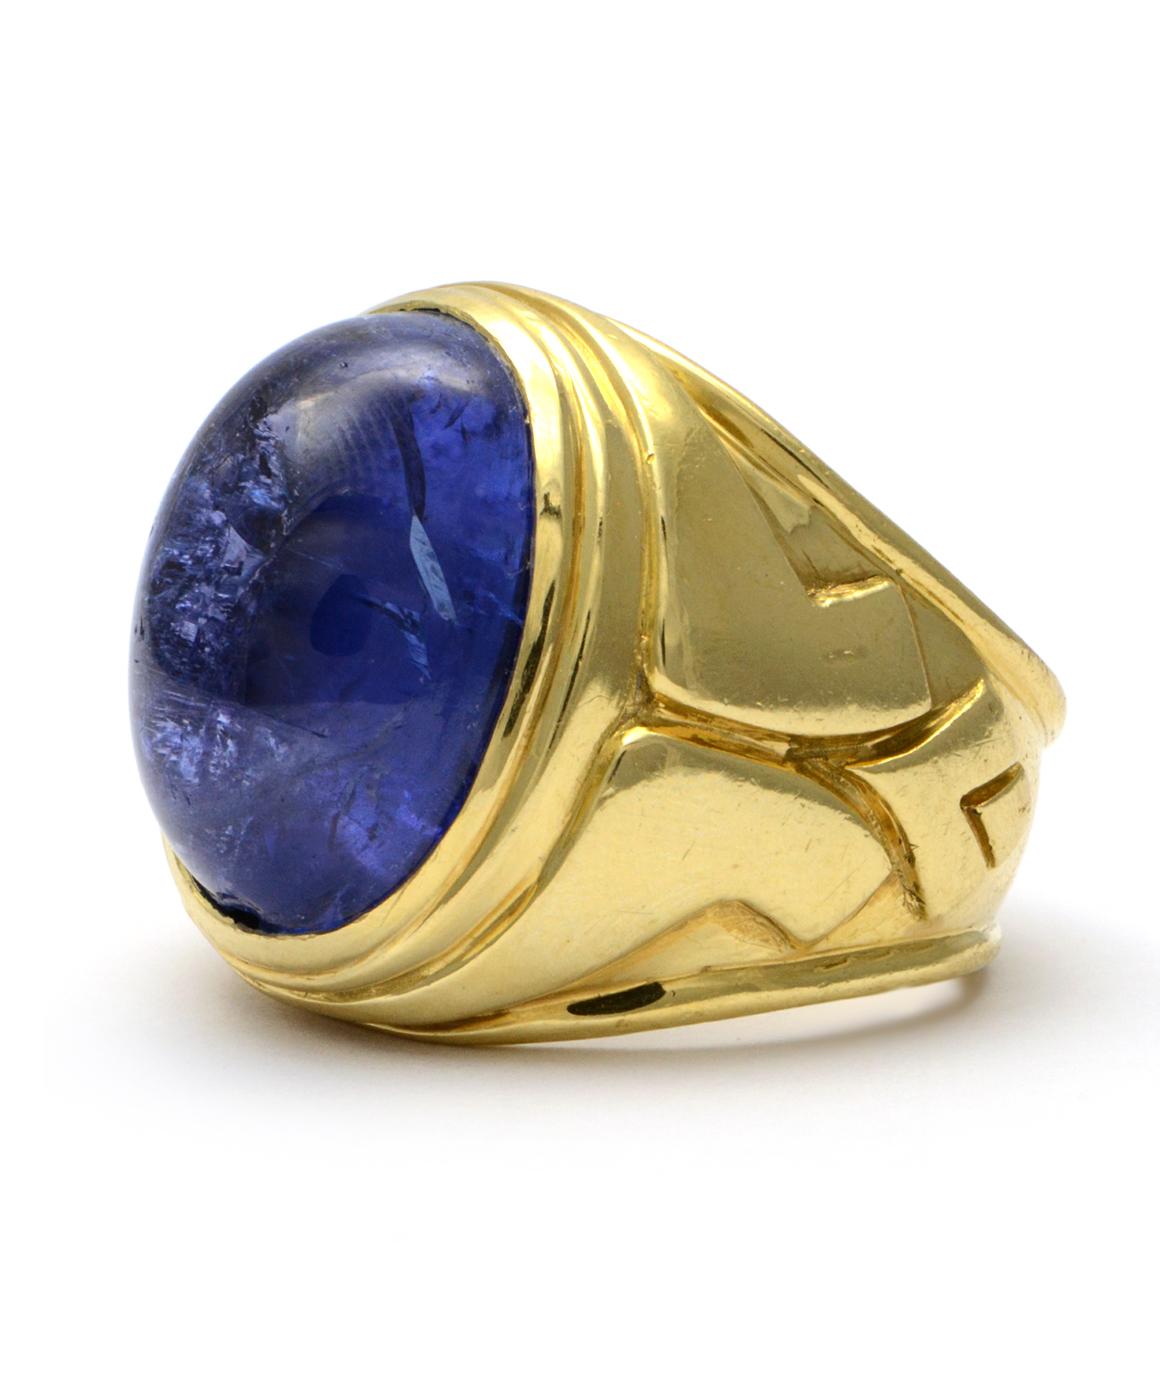 Excellent condition. This men's ring in solid 18K yellow gold features an oval cabochon genuine tanzanite that measures approximately 16.45mm in length X 11.65mm wide. The tanzanite is a gorgeous deep blue/purple color. The ring is a size 6.75 and